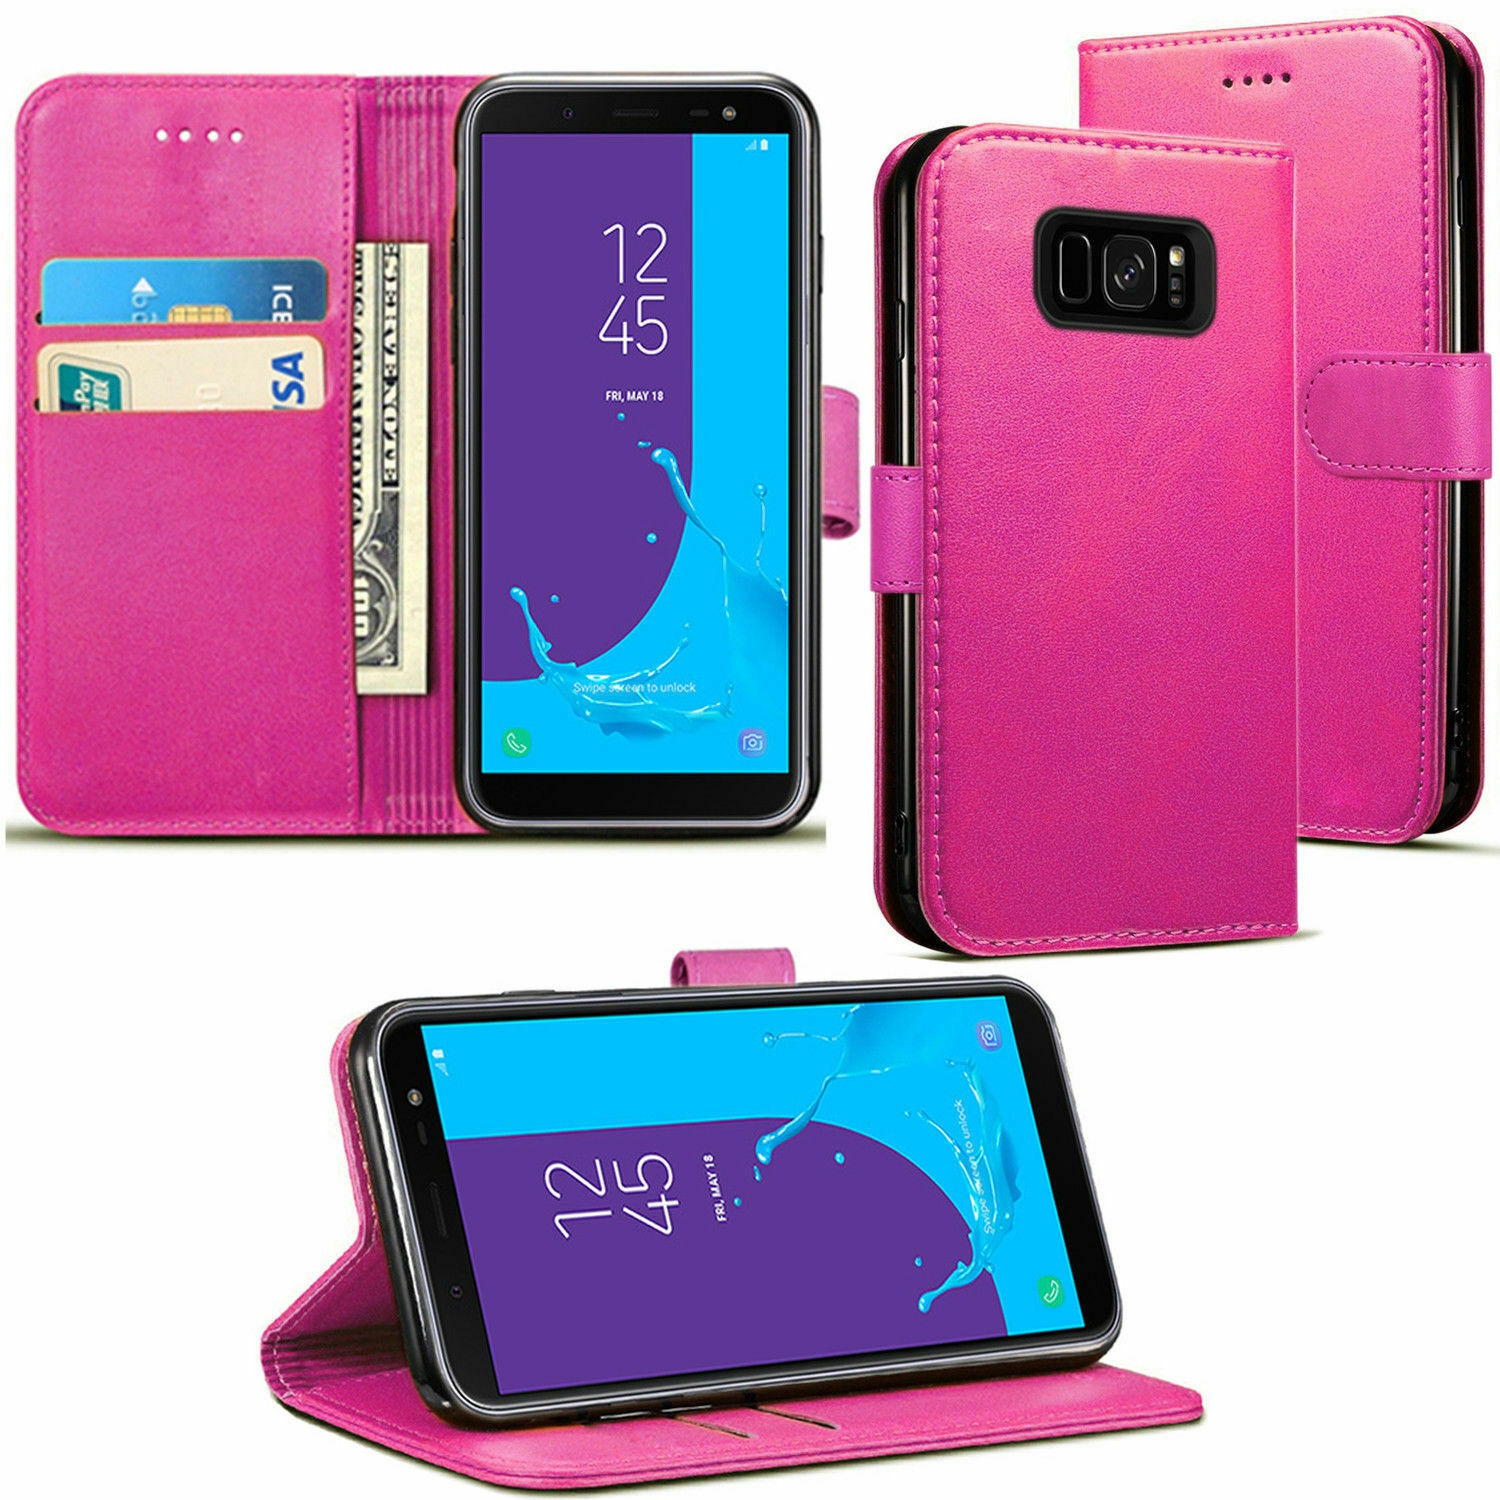 【CSmart】 Magnetic Card Slot Leather Folio Wallet Flip Case Cover for Samsung Galaxy S8 Plus, Hot Pink